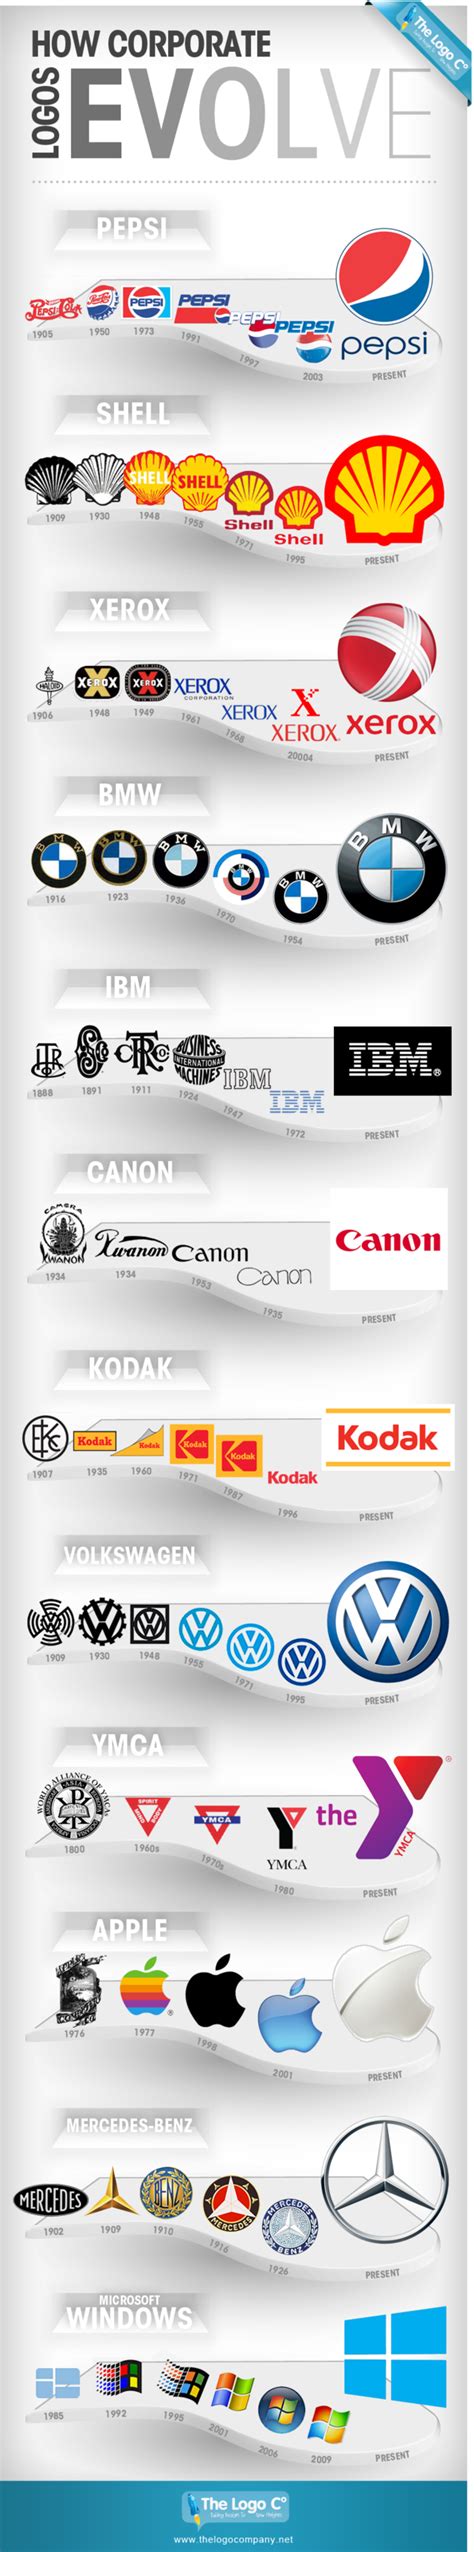 An Infographic Illustrating The Evolution Of Corporate Logos